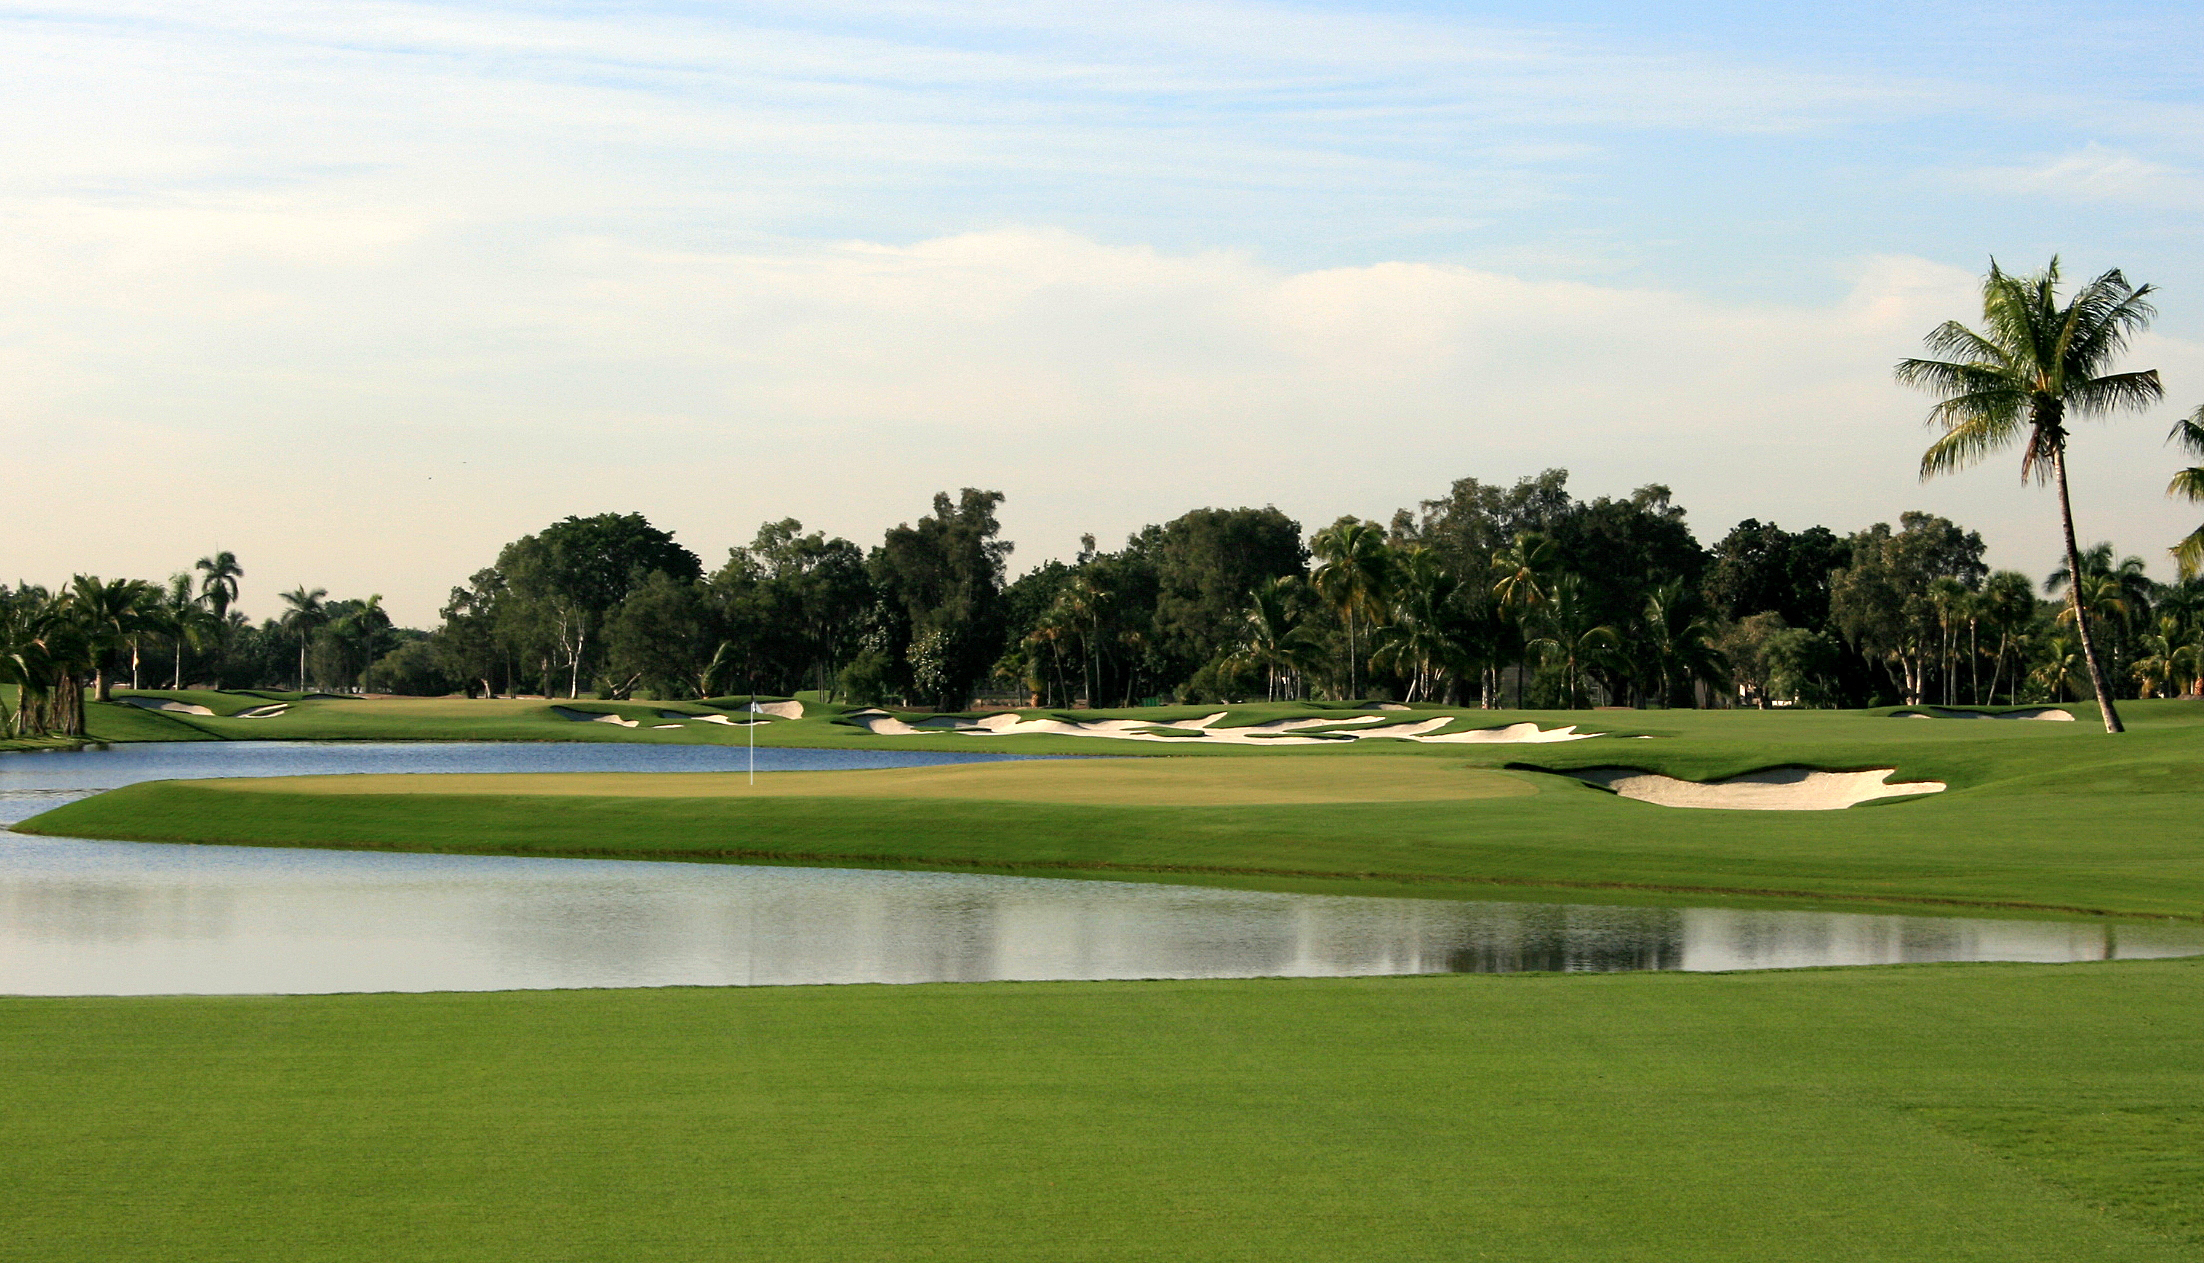 Lakes, water hazards and bunkers at Trump National Doral Miami golf course